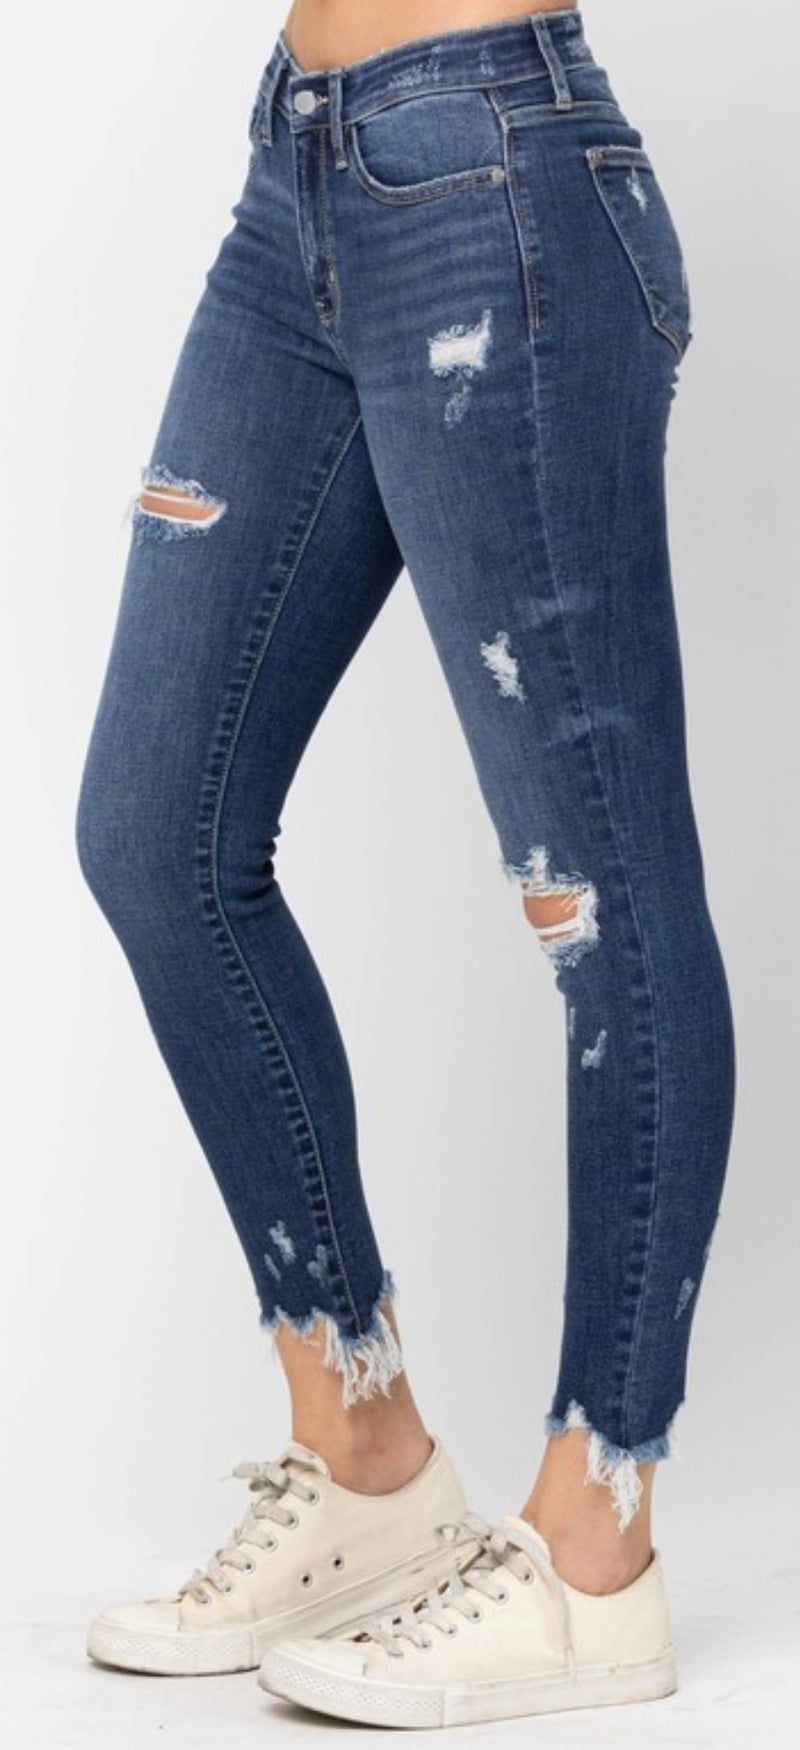 Judy blues remember me jeans